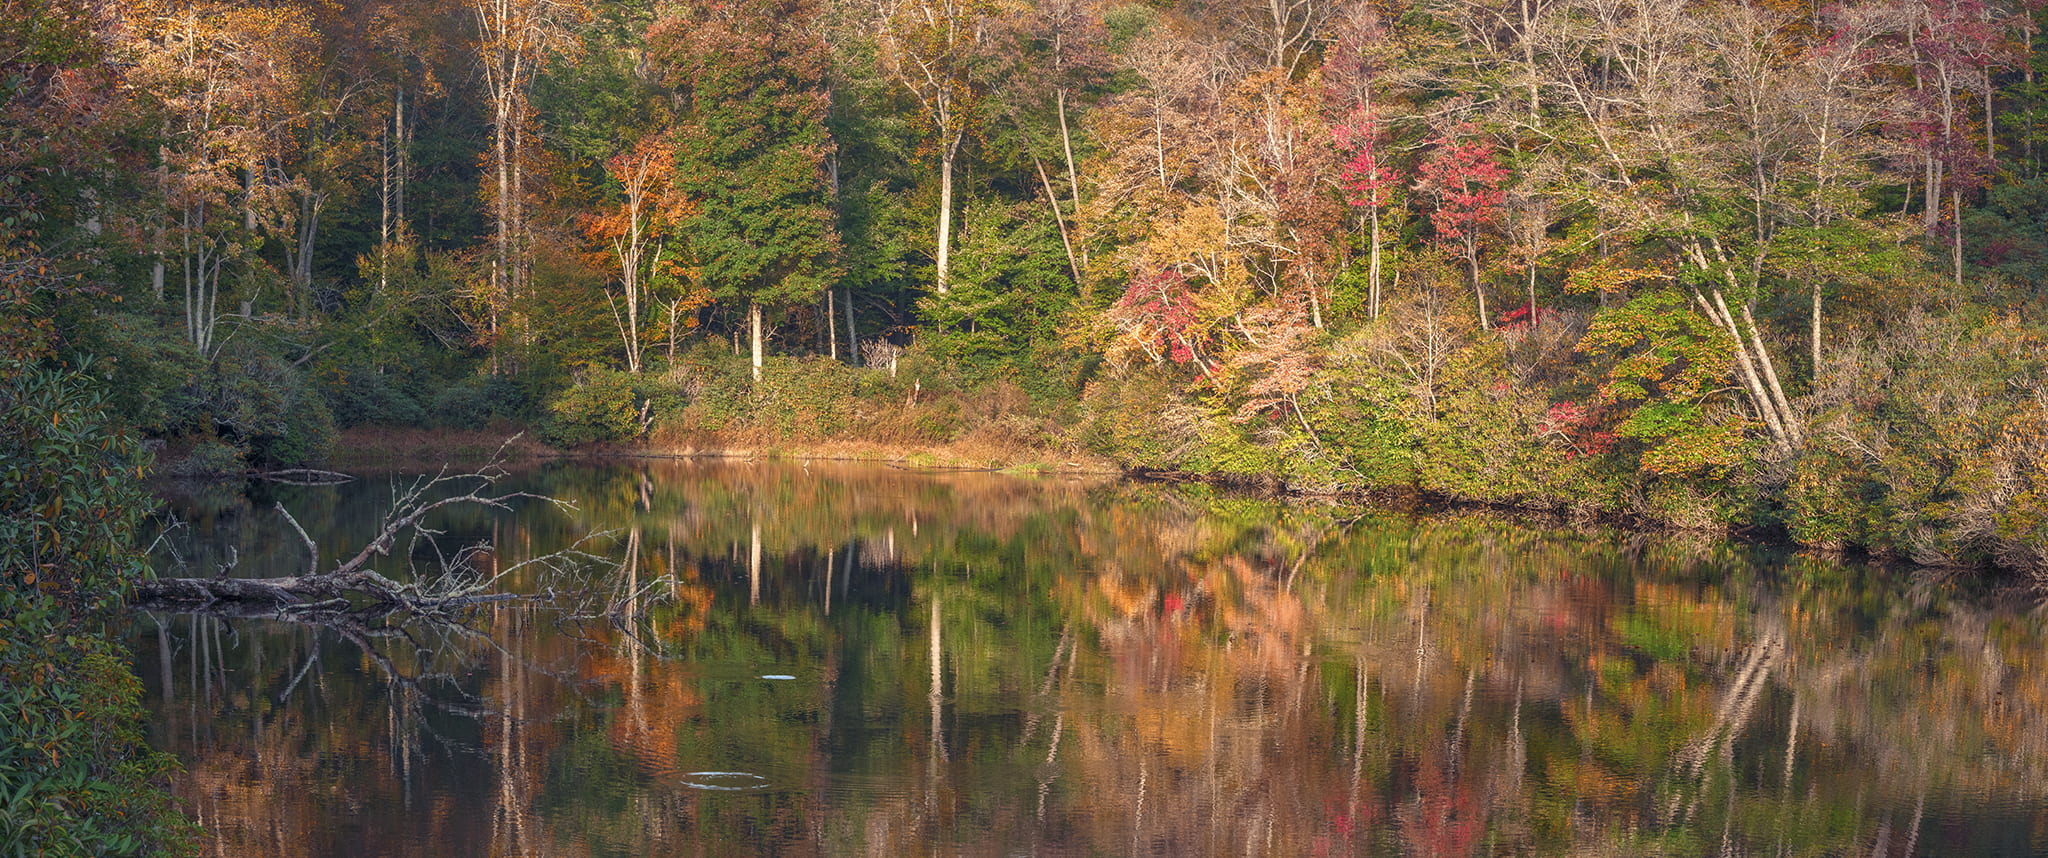 Sims Pond along Blue Ridge Parkway in Fall